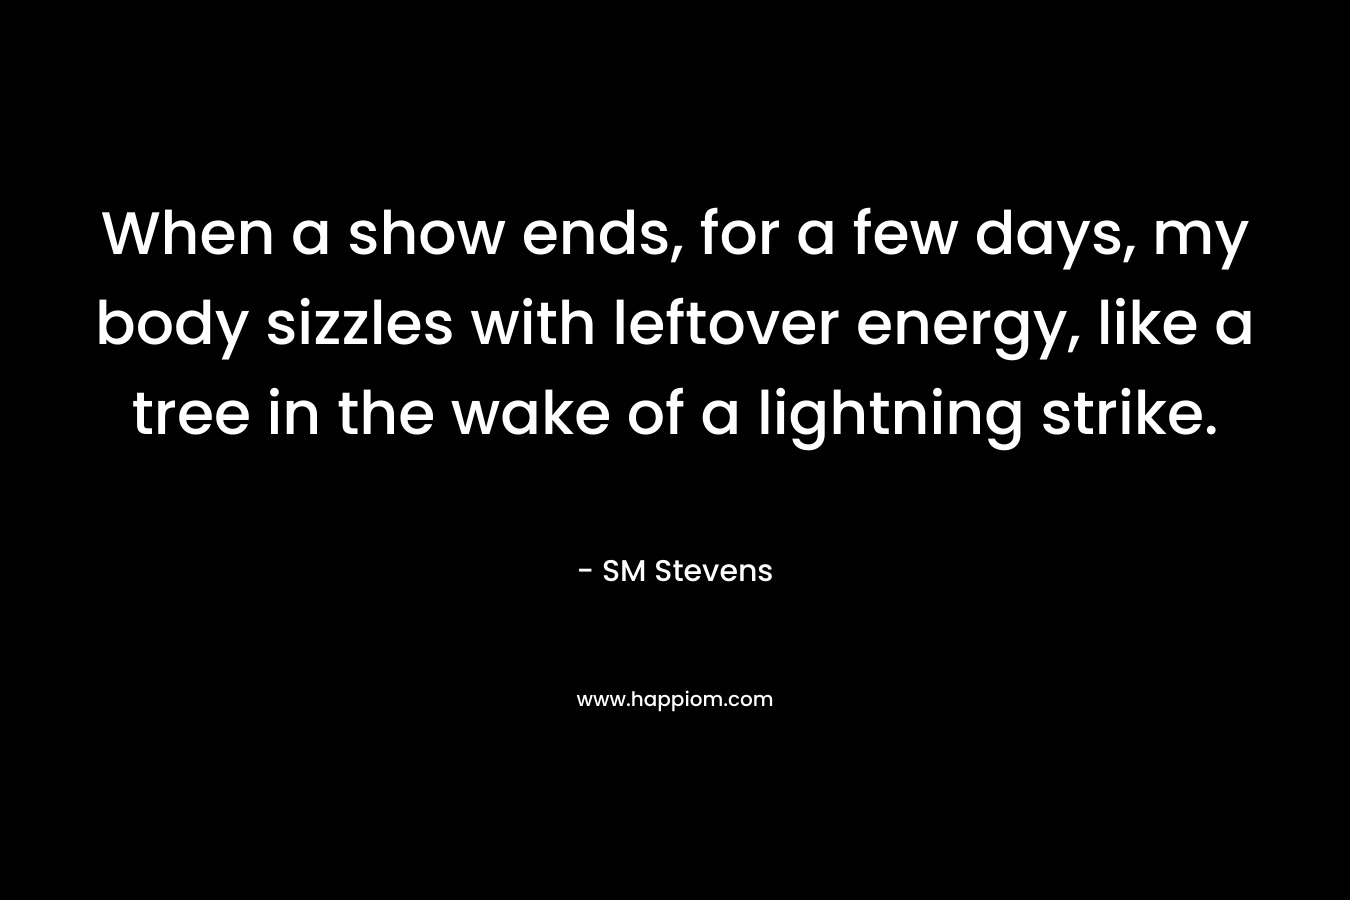 When a show ends, for a few days, my body sizzles with leftover energy, like a tree in the wake of a lightning strike. – SM Stevens